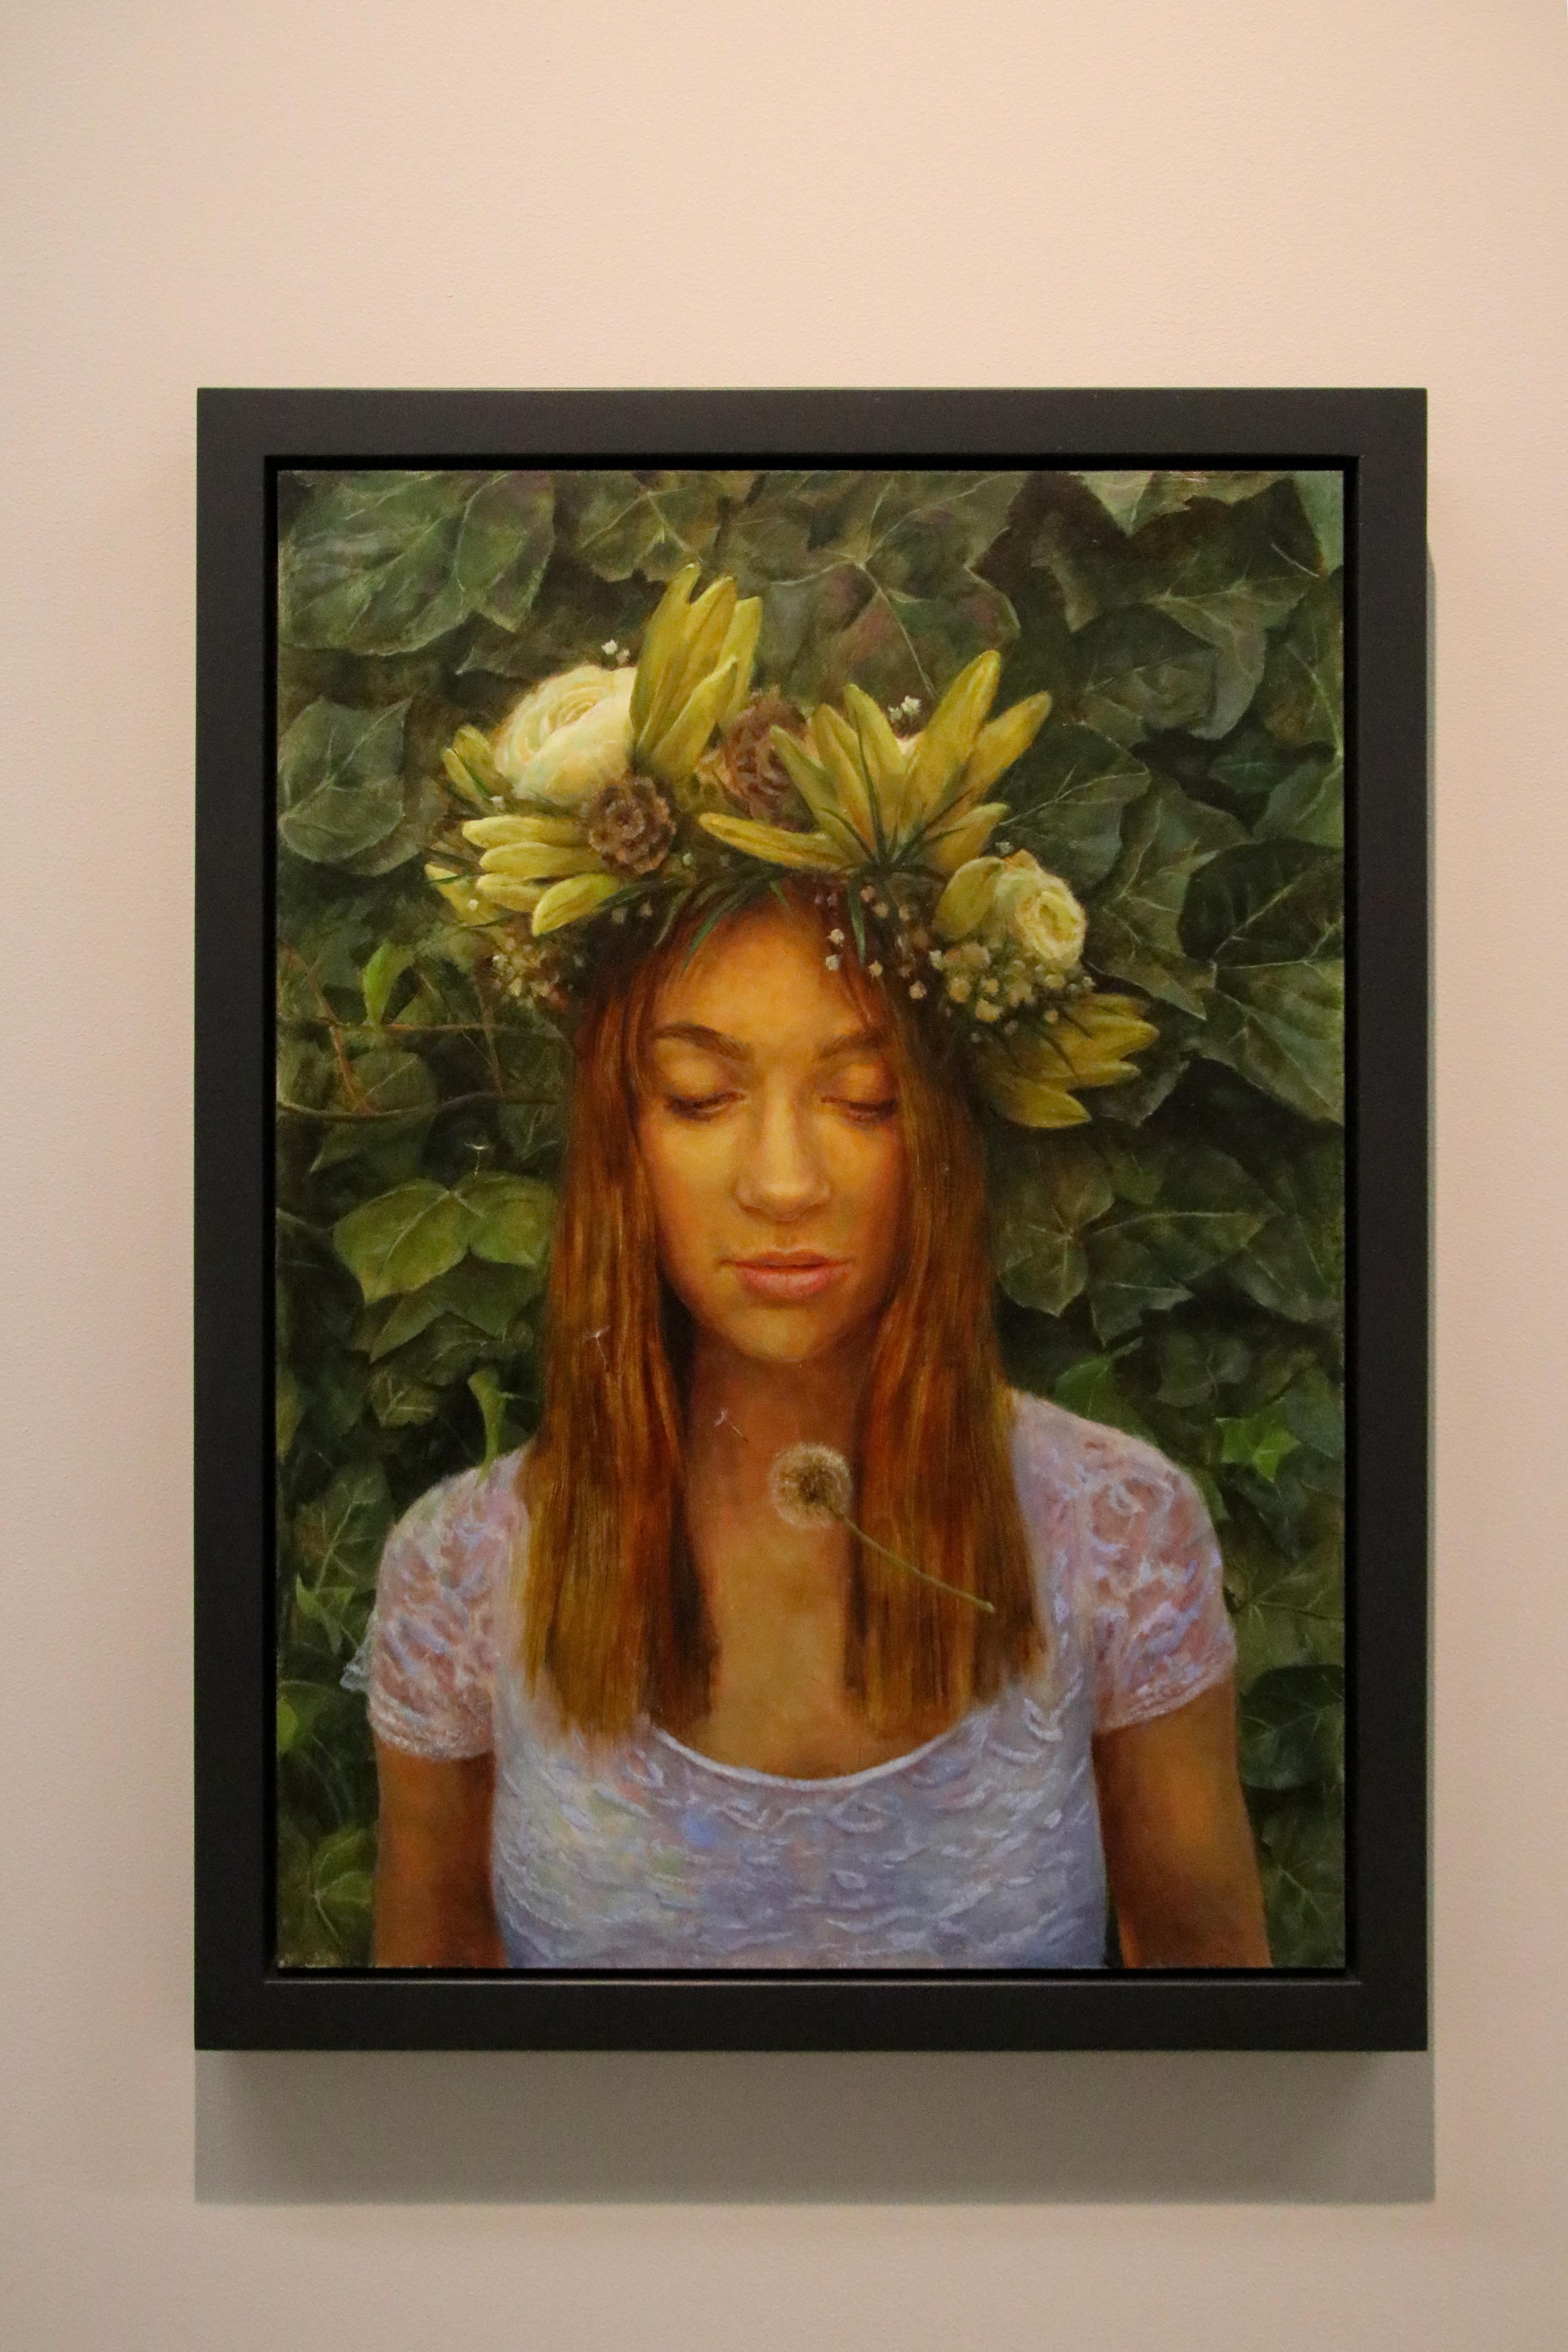 Free Spirit- 21st Century Contemporary Portrait Painting of a young girl  - Brown Figurative Painting by Erik van Elven